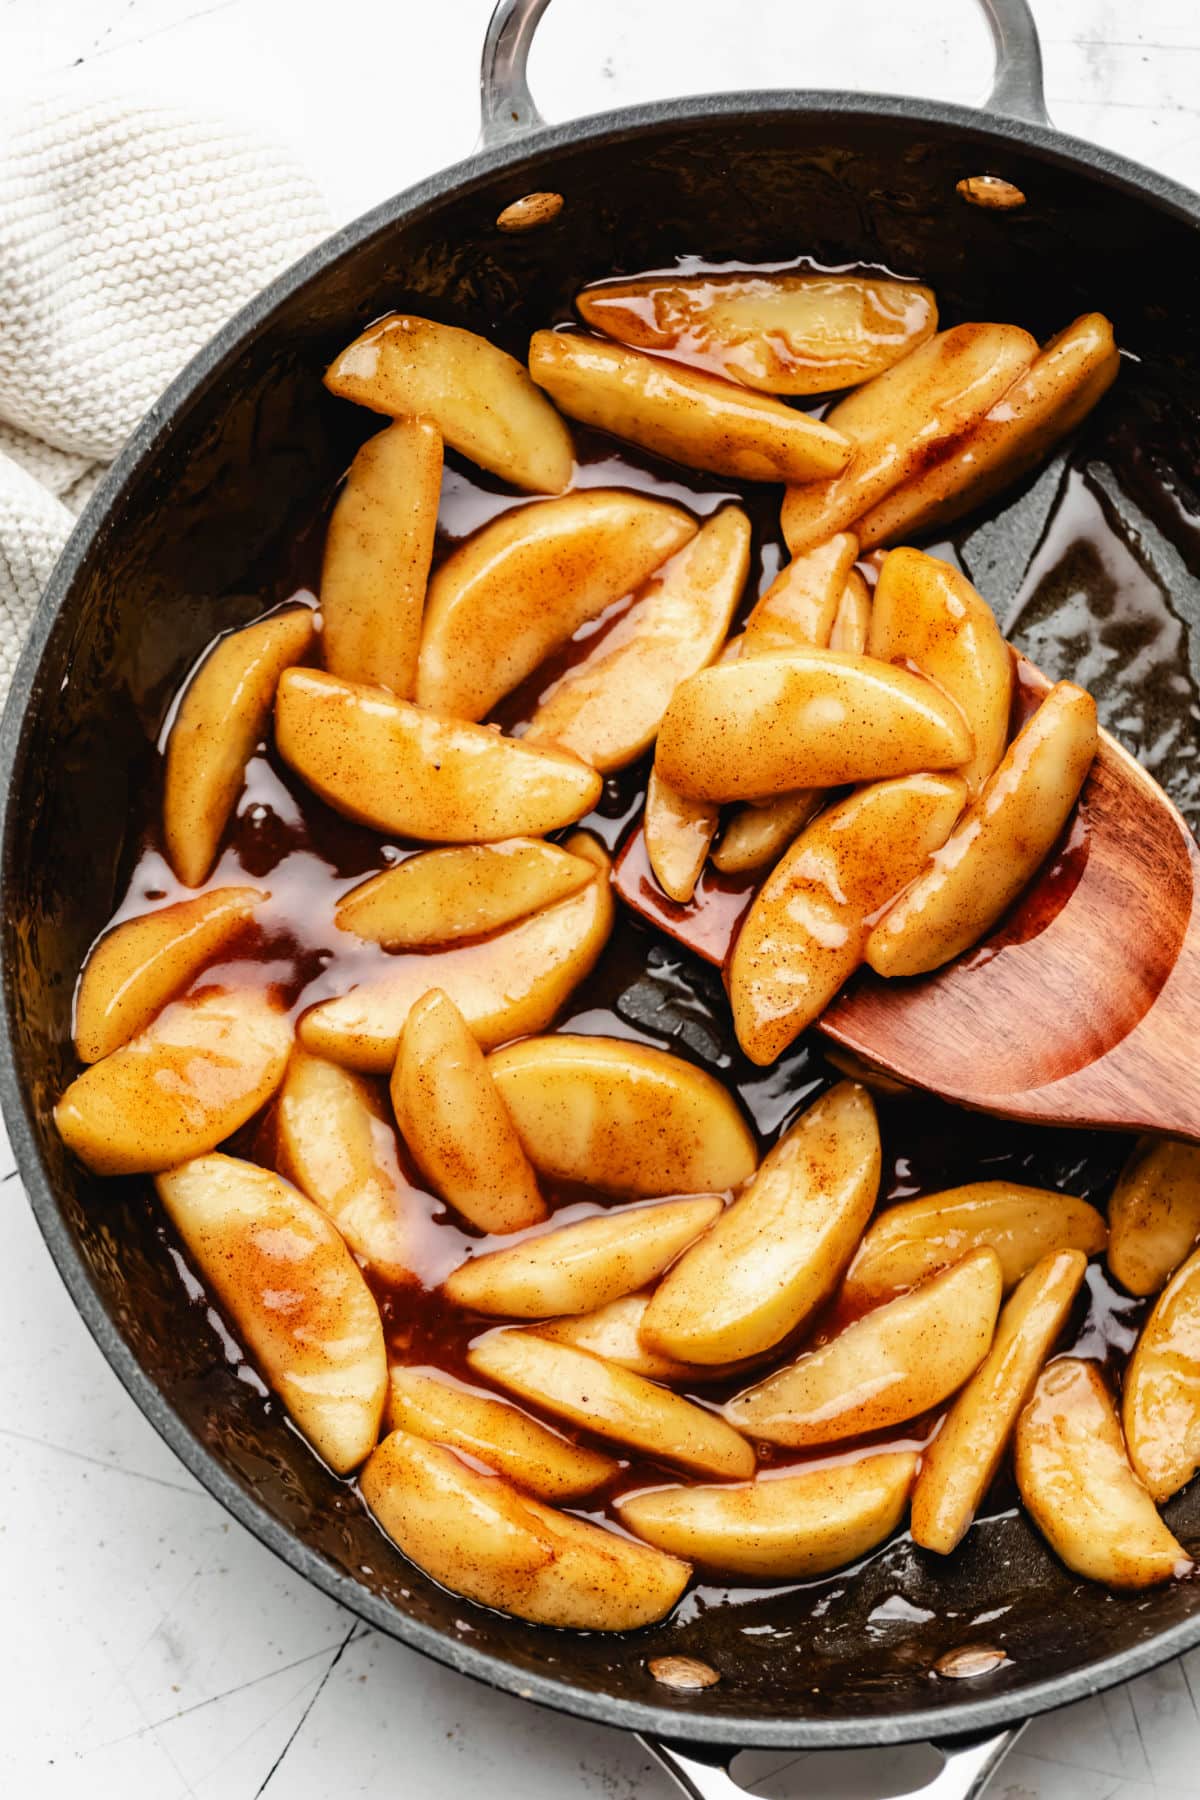 A cast iron skillet filled with sauteed cinnamon apples next to a tan kitchen linen.